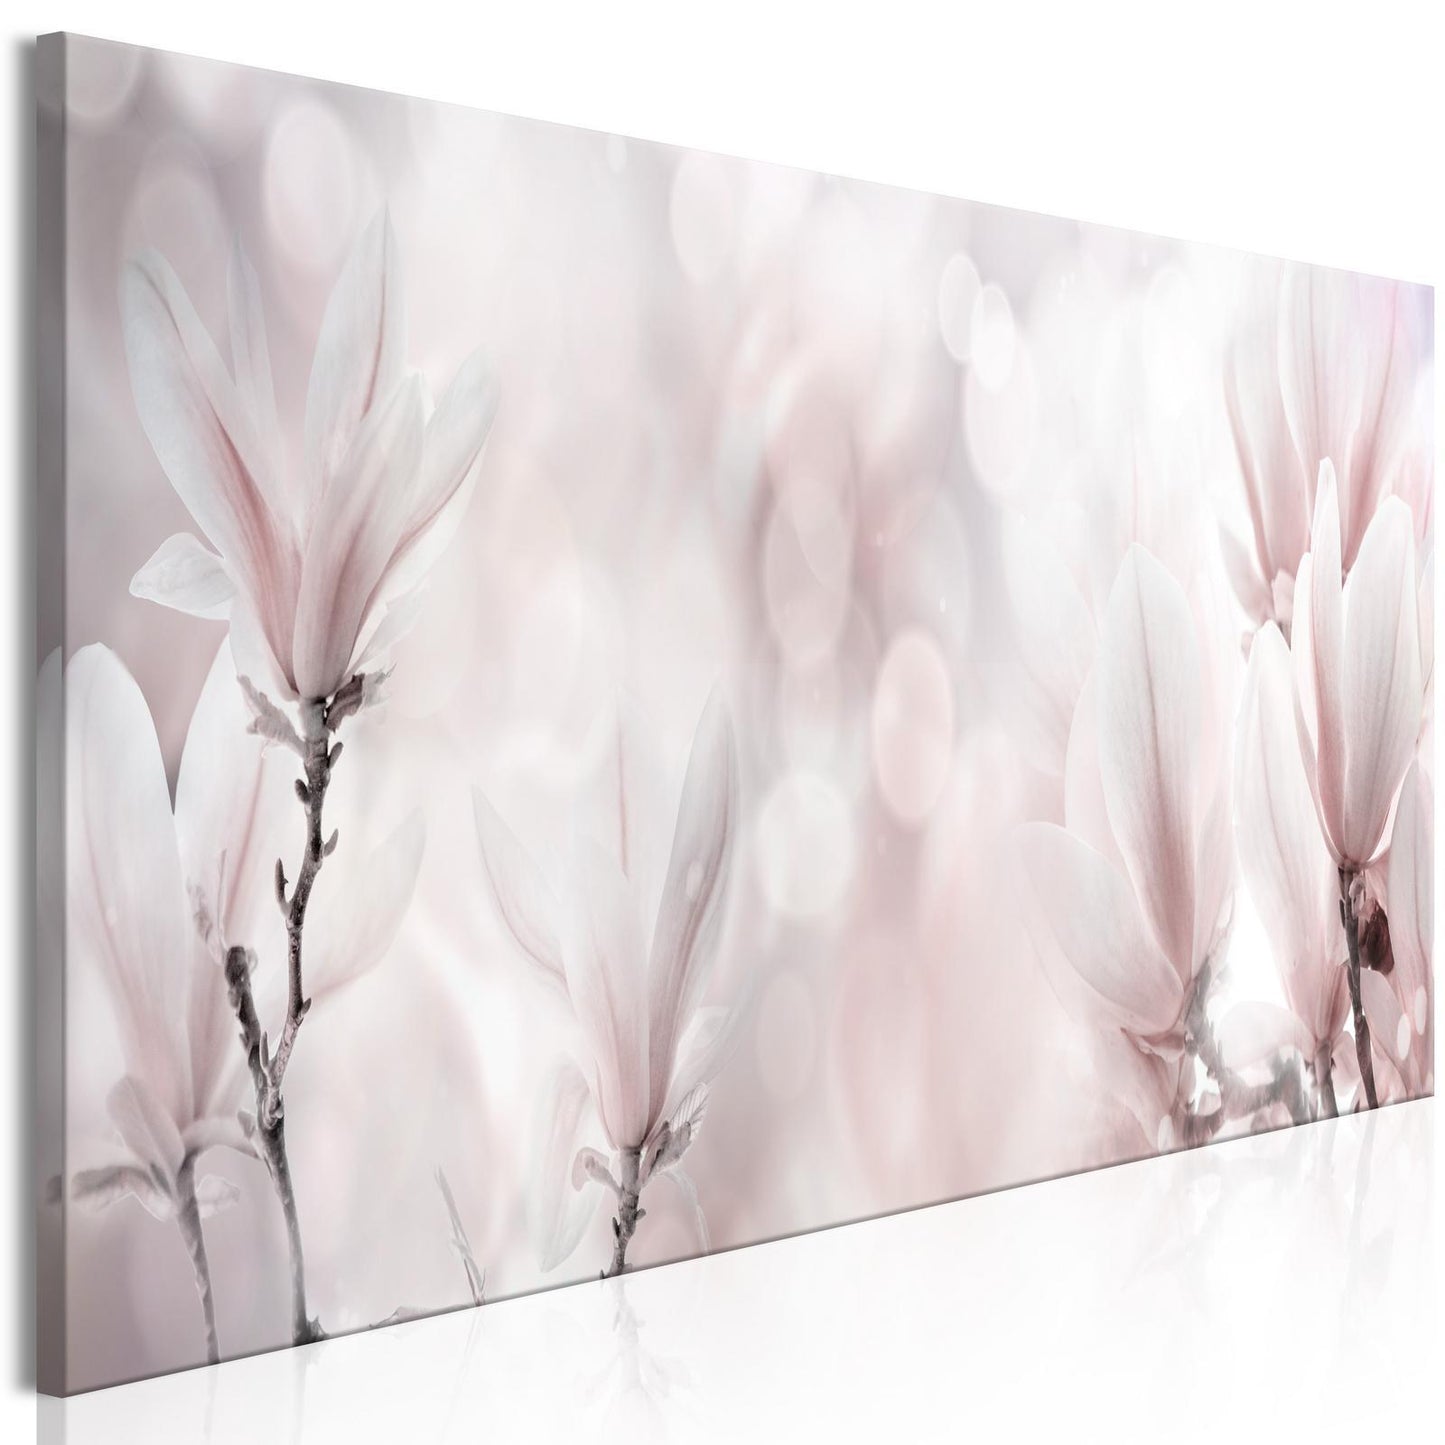 Painting - Misty Flowers (1 Part) Narrow